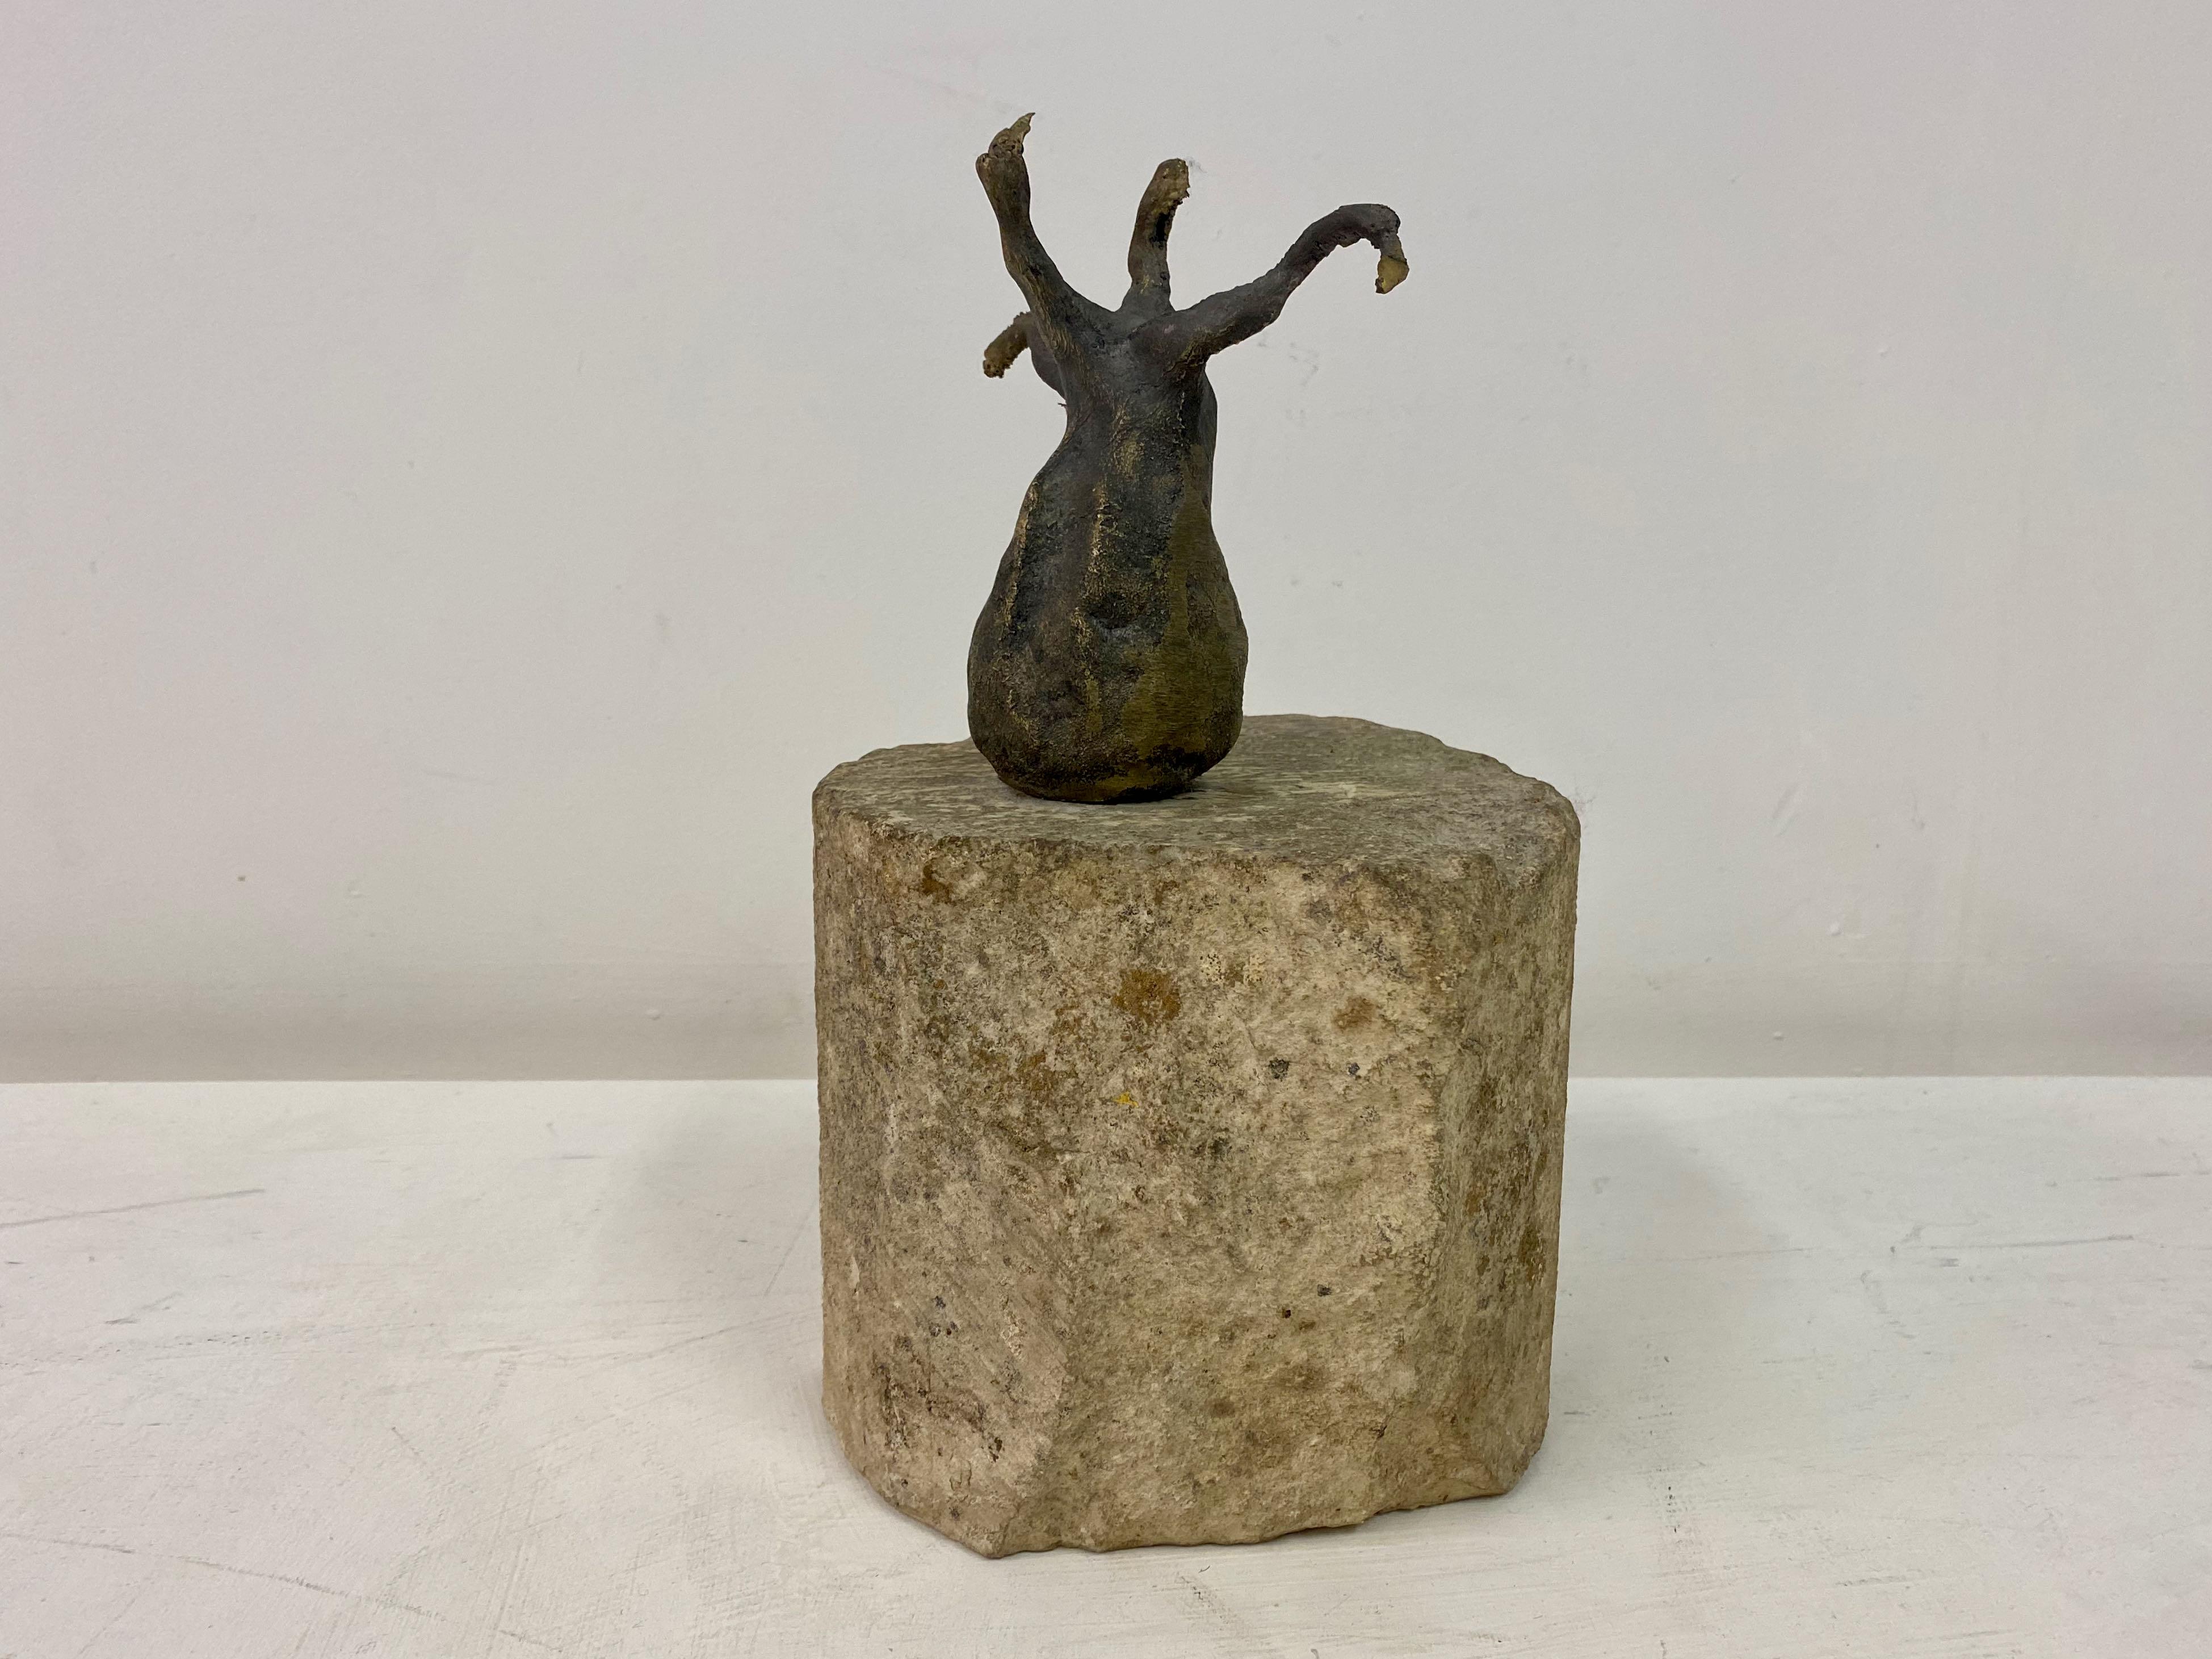 Abstract bronze sculpture

On stone base

Roughly finished bronze,

Mid-late 20th century.